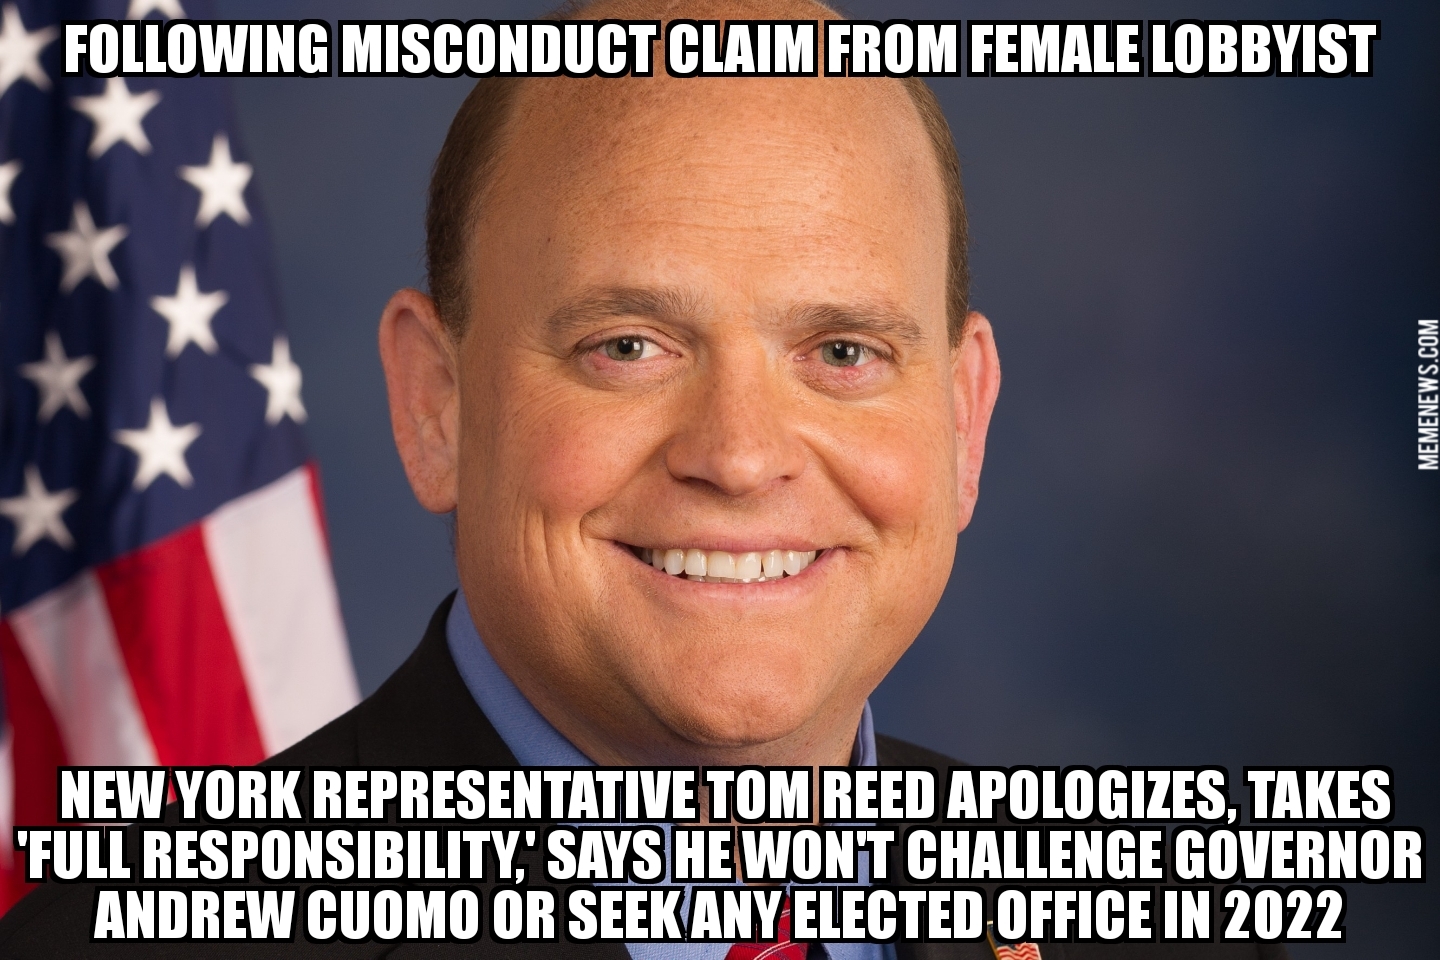 Tom Reed apologizes after misconduct claim